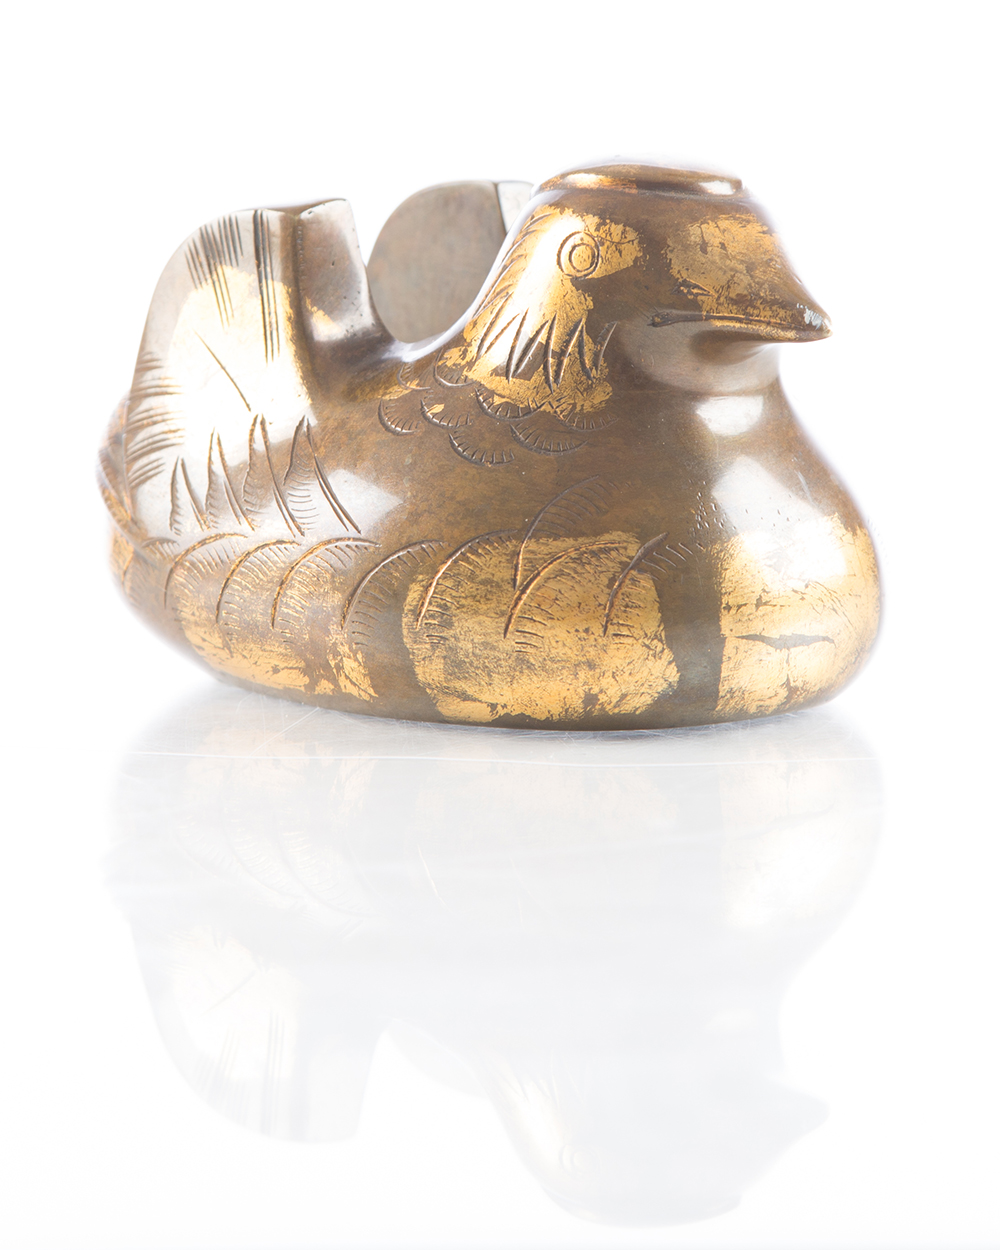 a 3” high brass sculpture of a bird with carved lines showing feathers, wings, and eyes. There are patches of gold leaf around the body and head of the bird. 